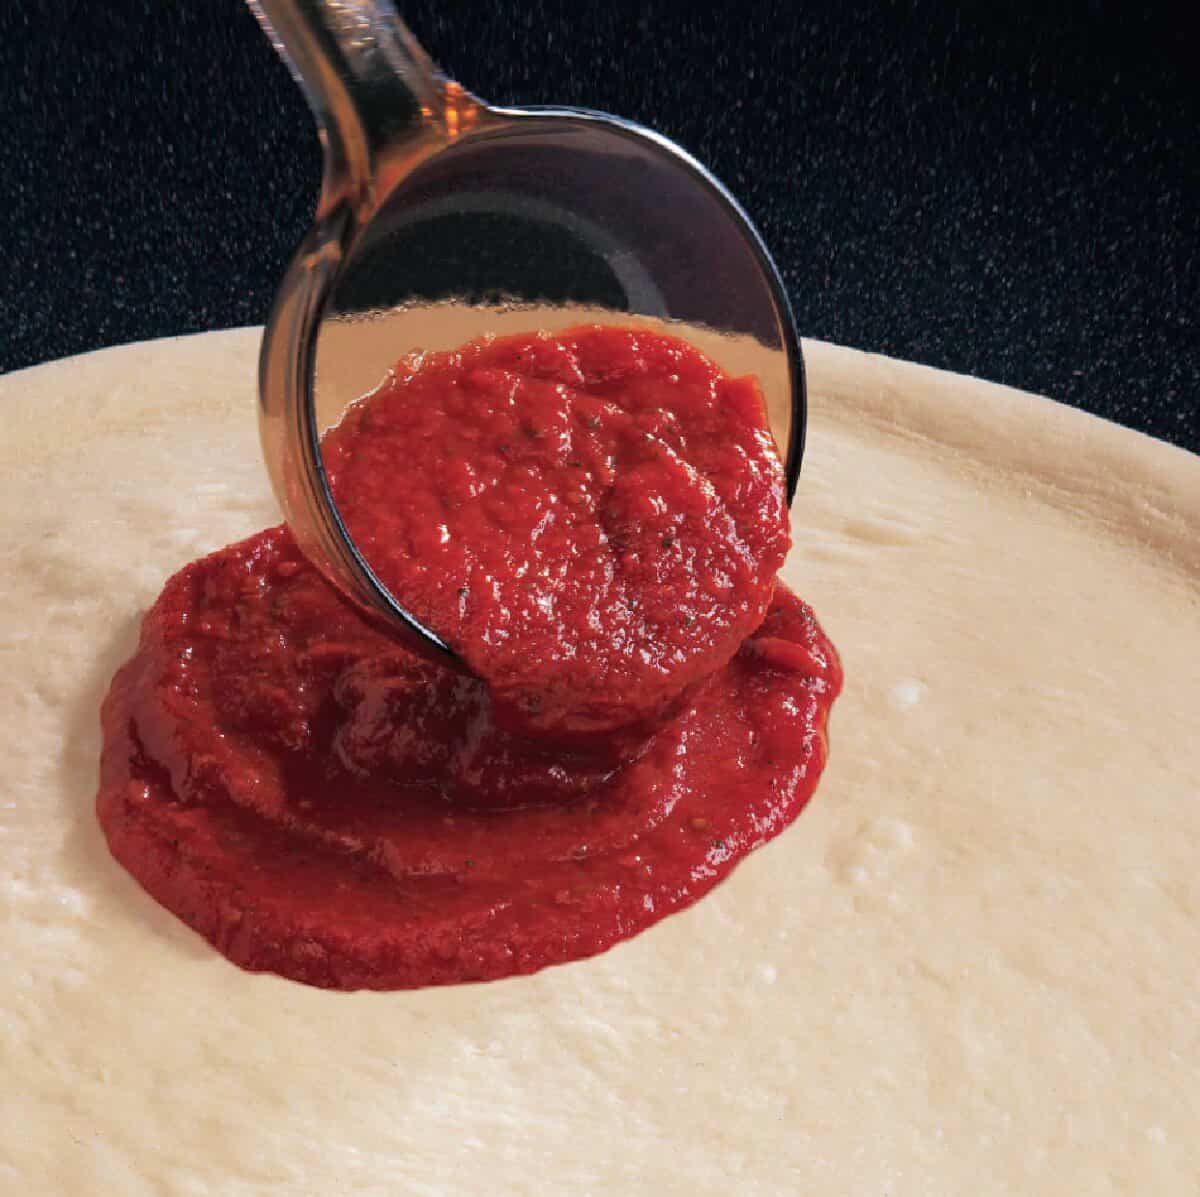 A scoop of Papa John's pizza sauce is being spread over an uncooked pizza dough circle.